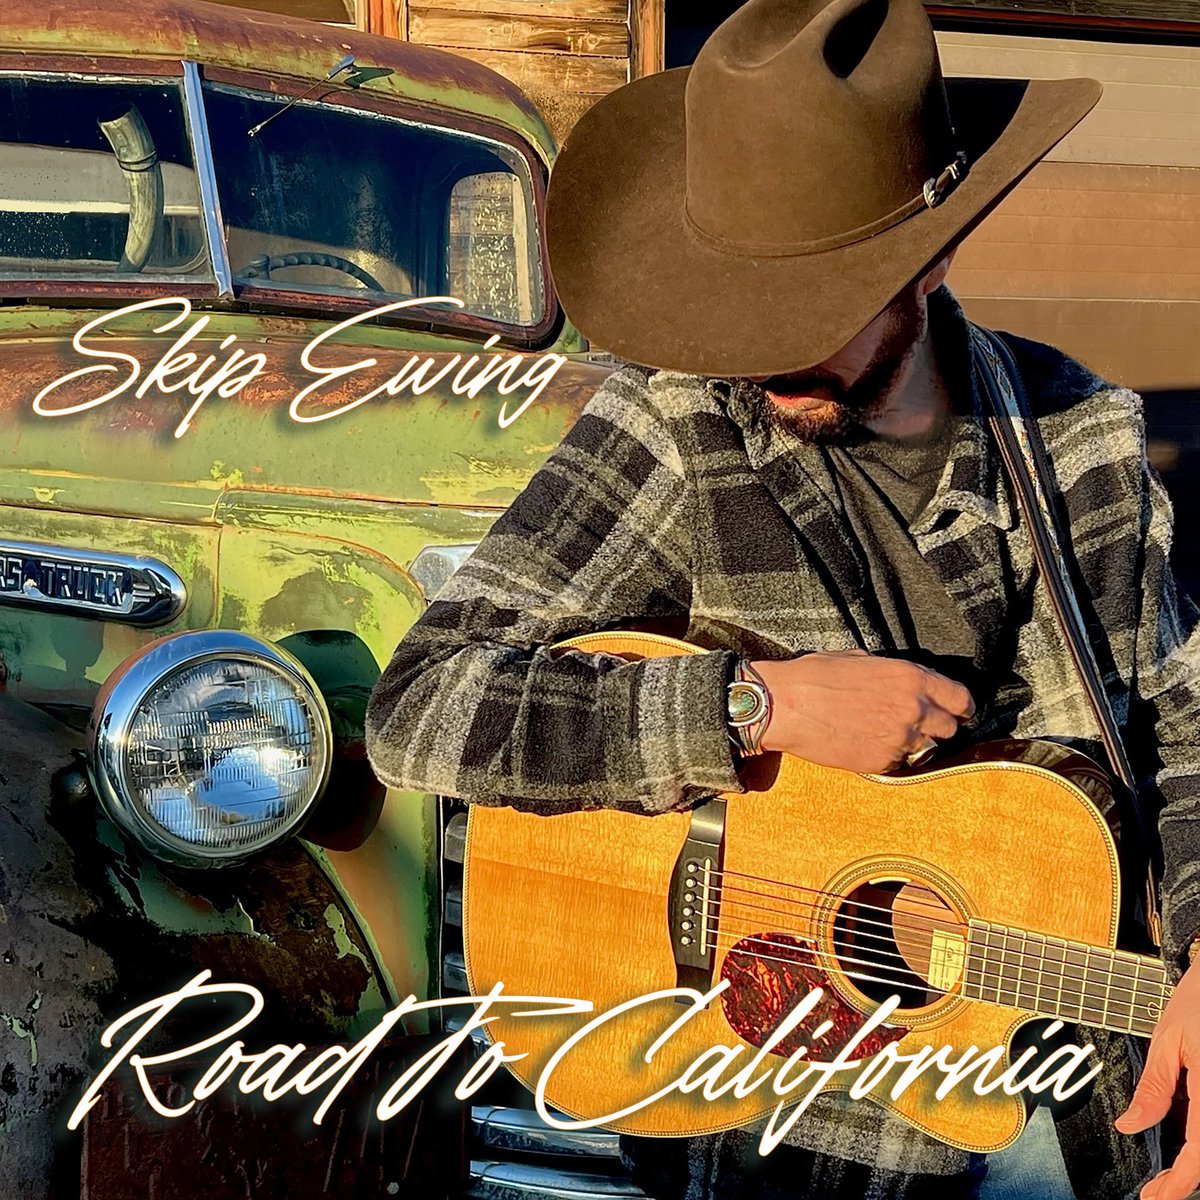 Stoked for this one to hit tomorrow - 'Road to California', the new album from @SkipEwing ... anything by Skip is songwriting at it's best.